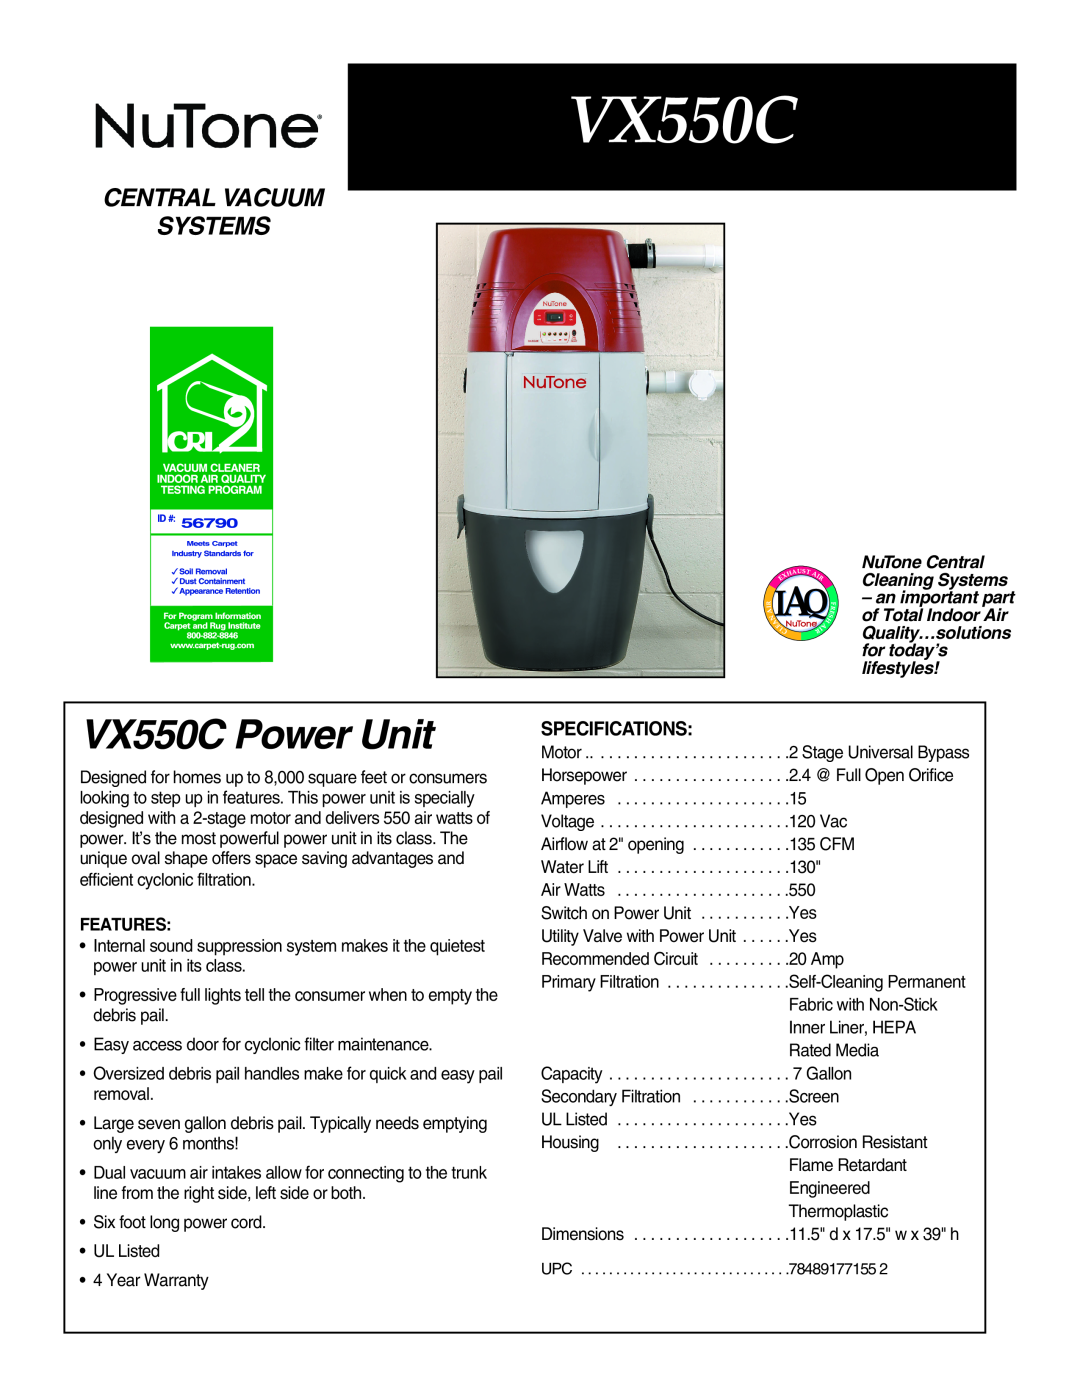 NuTone specifications VX550C Power Unit, Central Vacuum Systems, Specifications, NuTone Central Cleaning Systems 